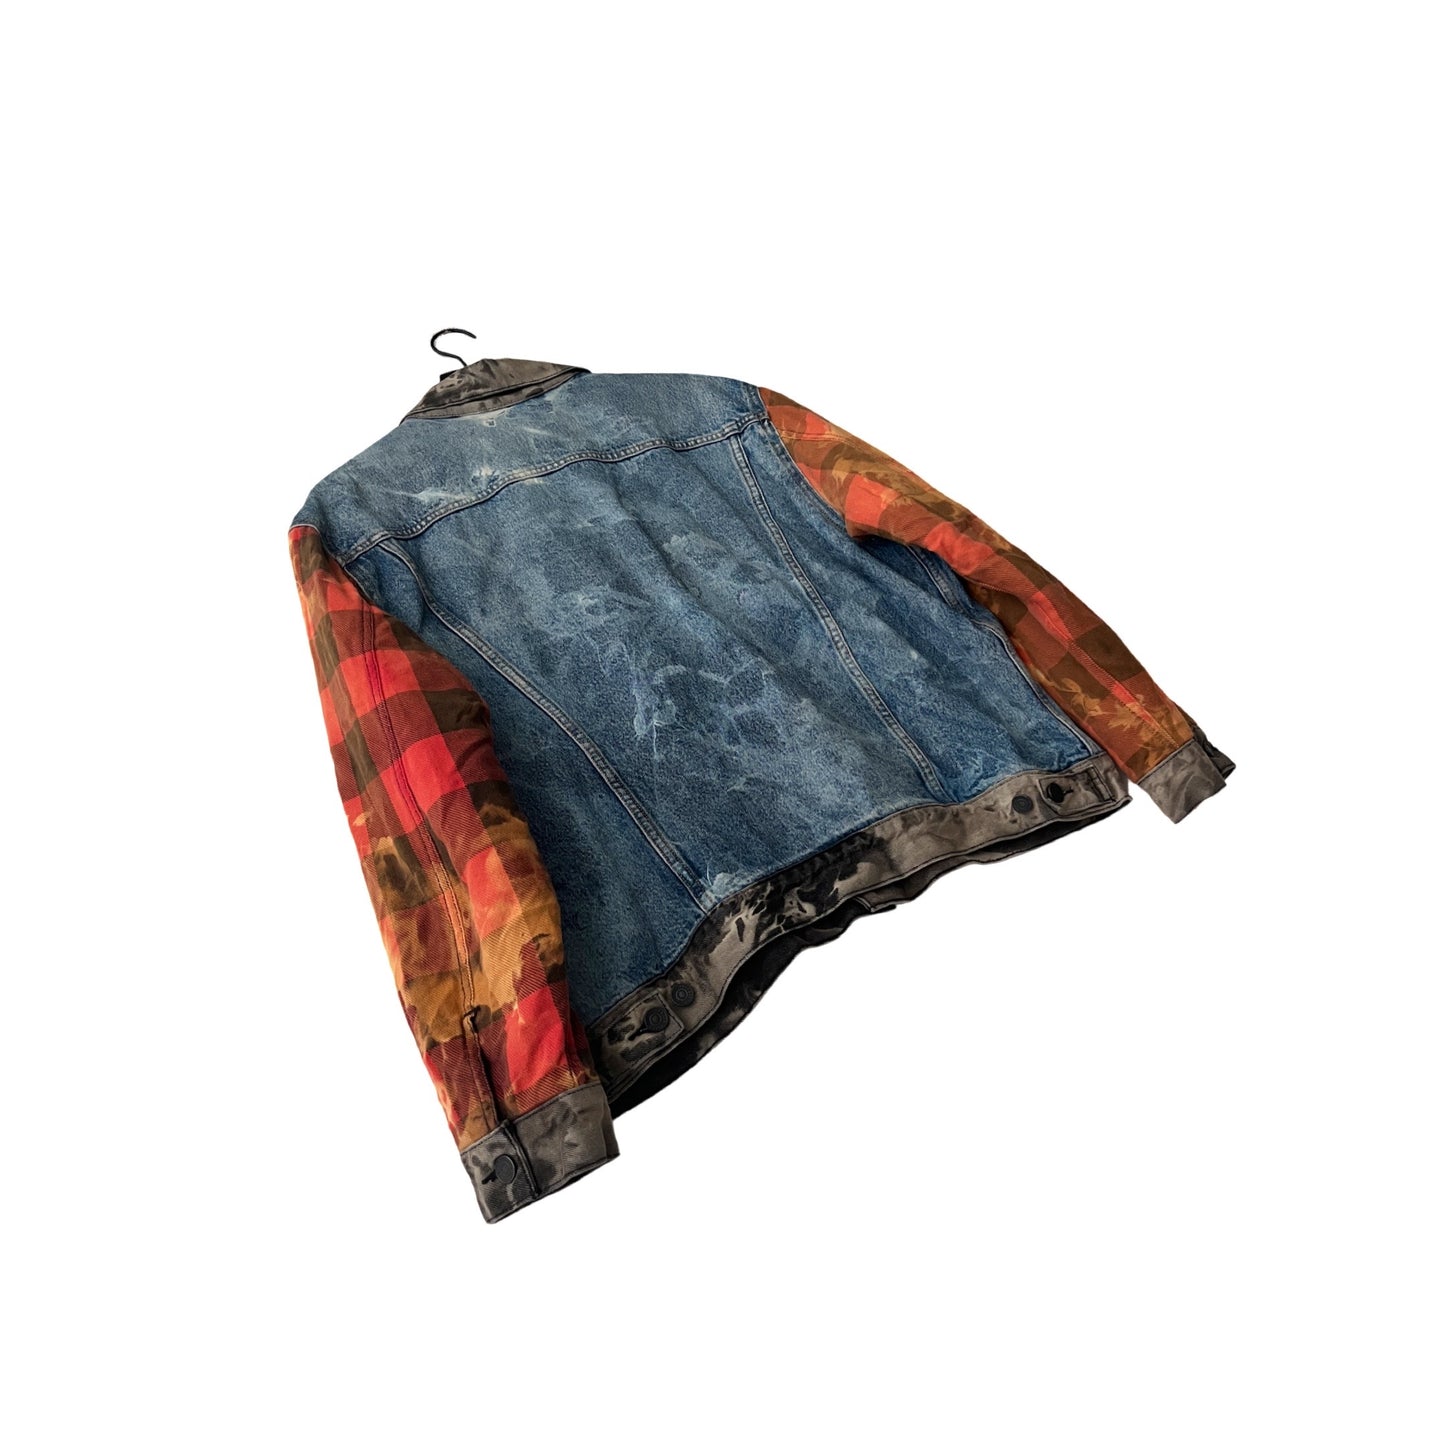 Levi's Reworked Trucker Jacket in Des Moines / LARGE